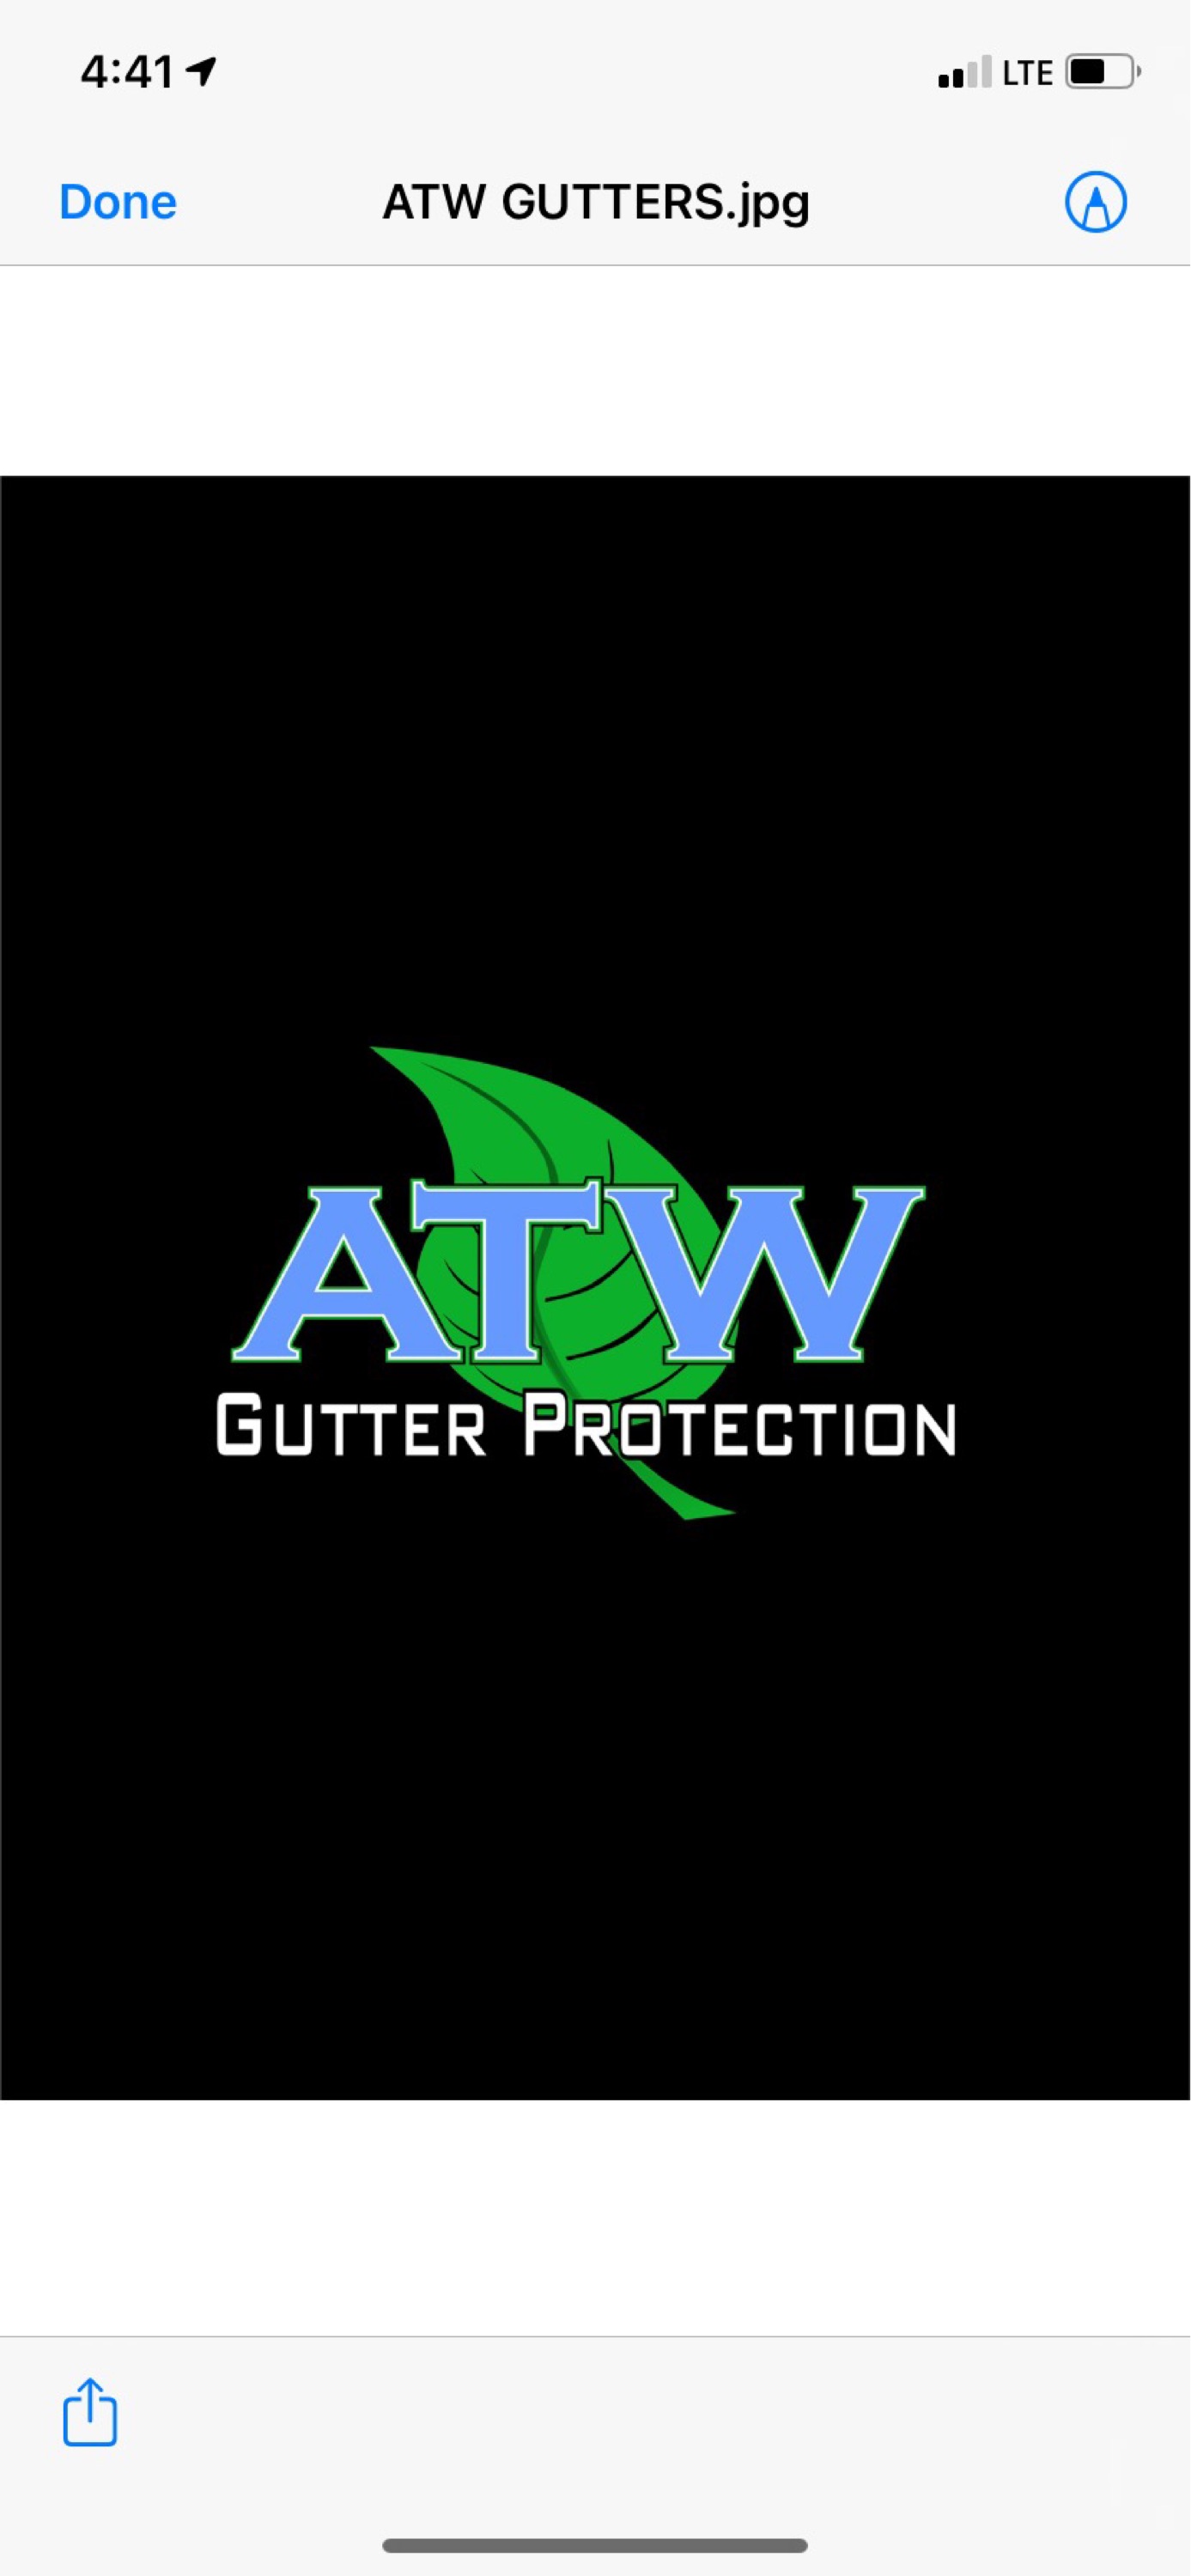 All the Way Gutter Protection Logo